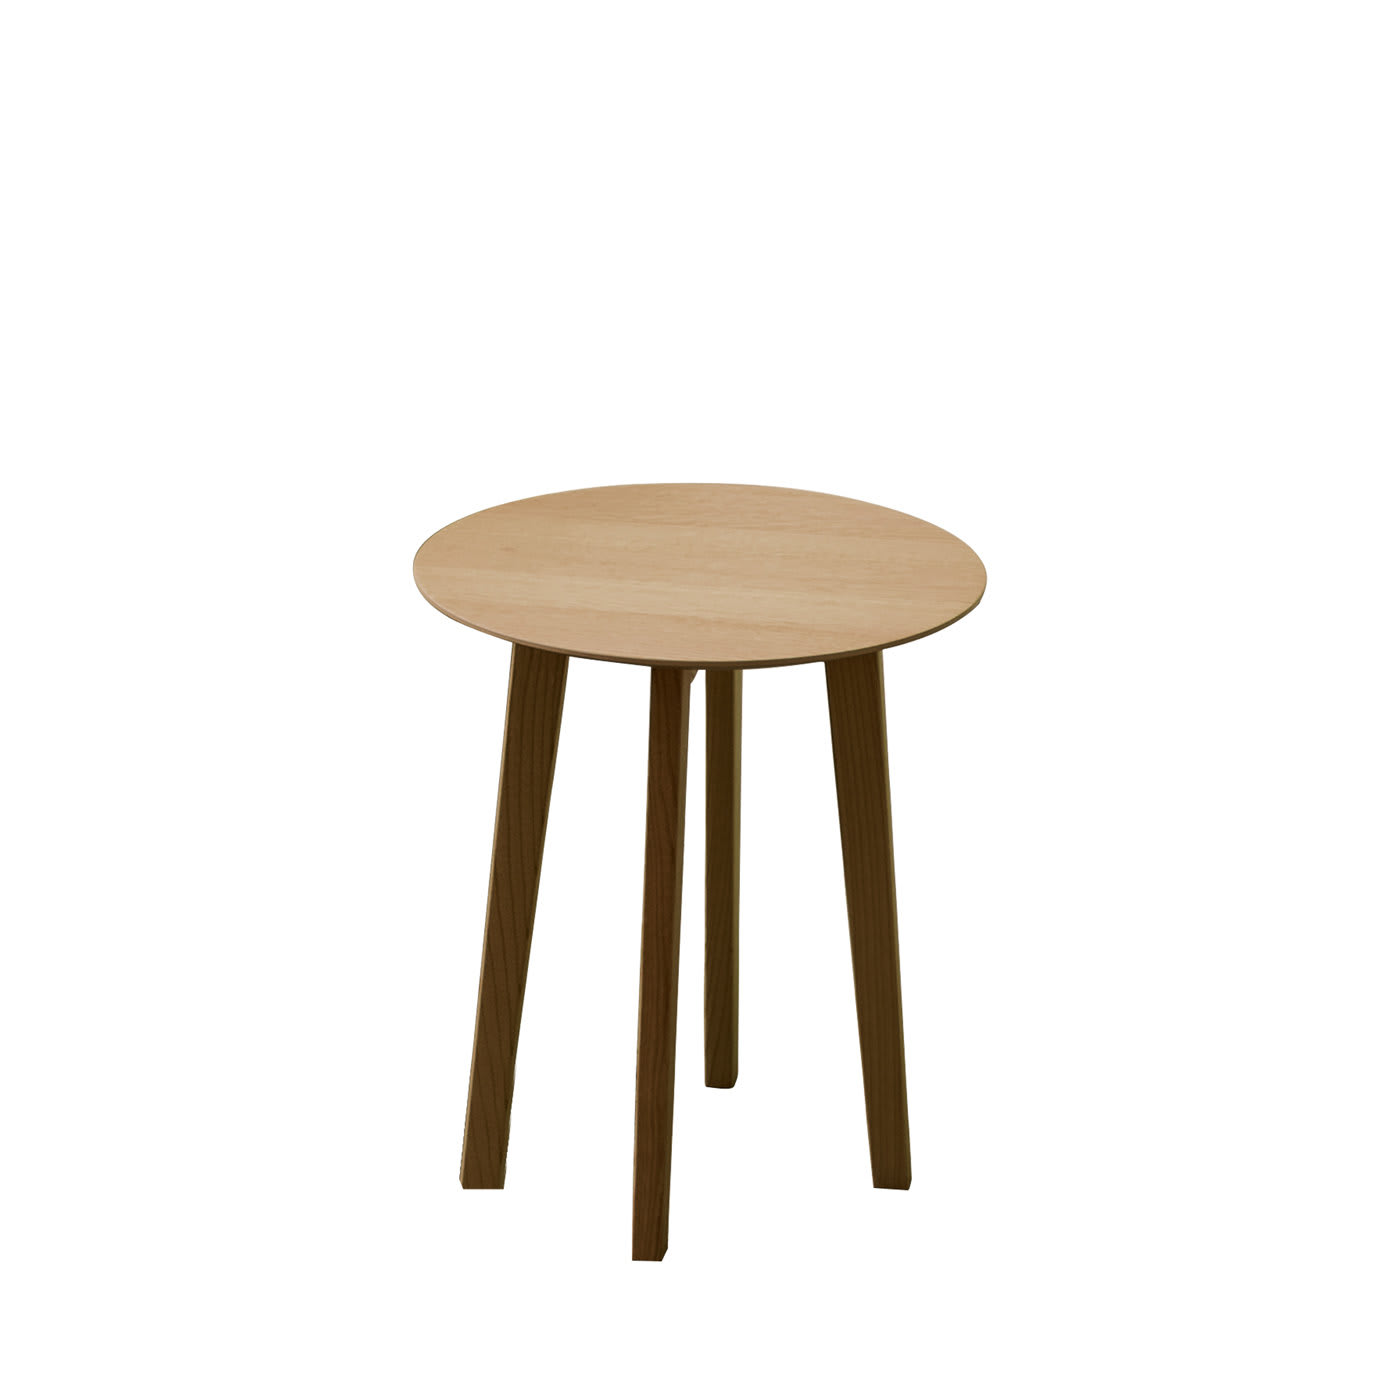 Zoe Small Side Table - Dall'Agnese